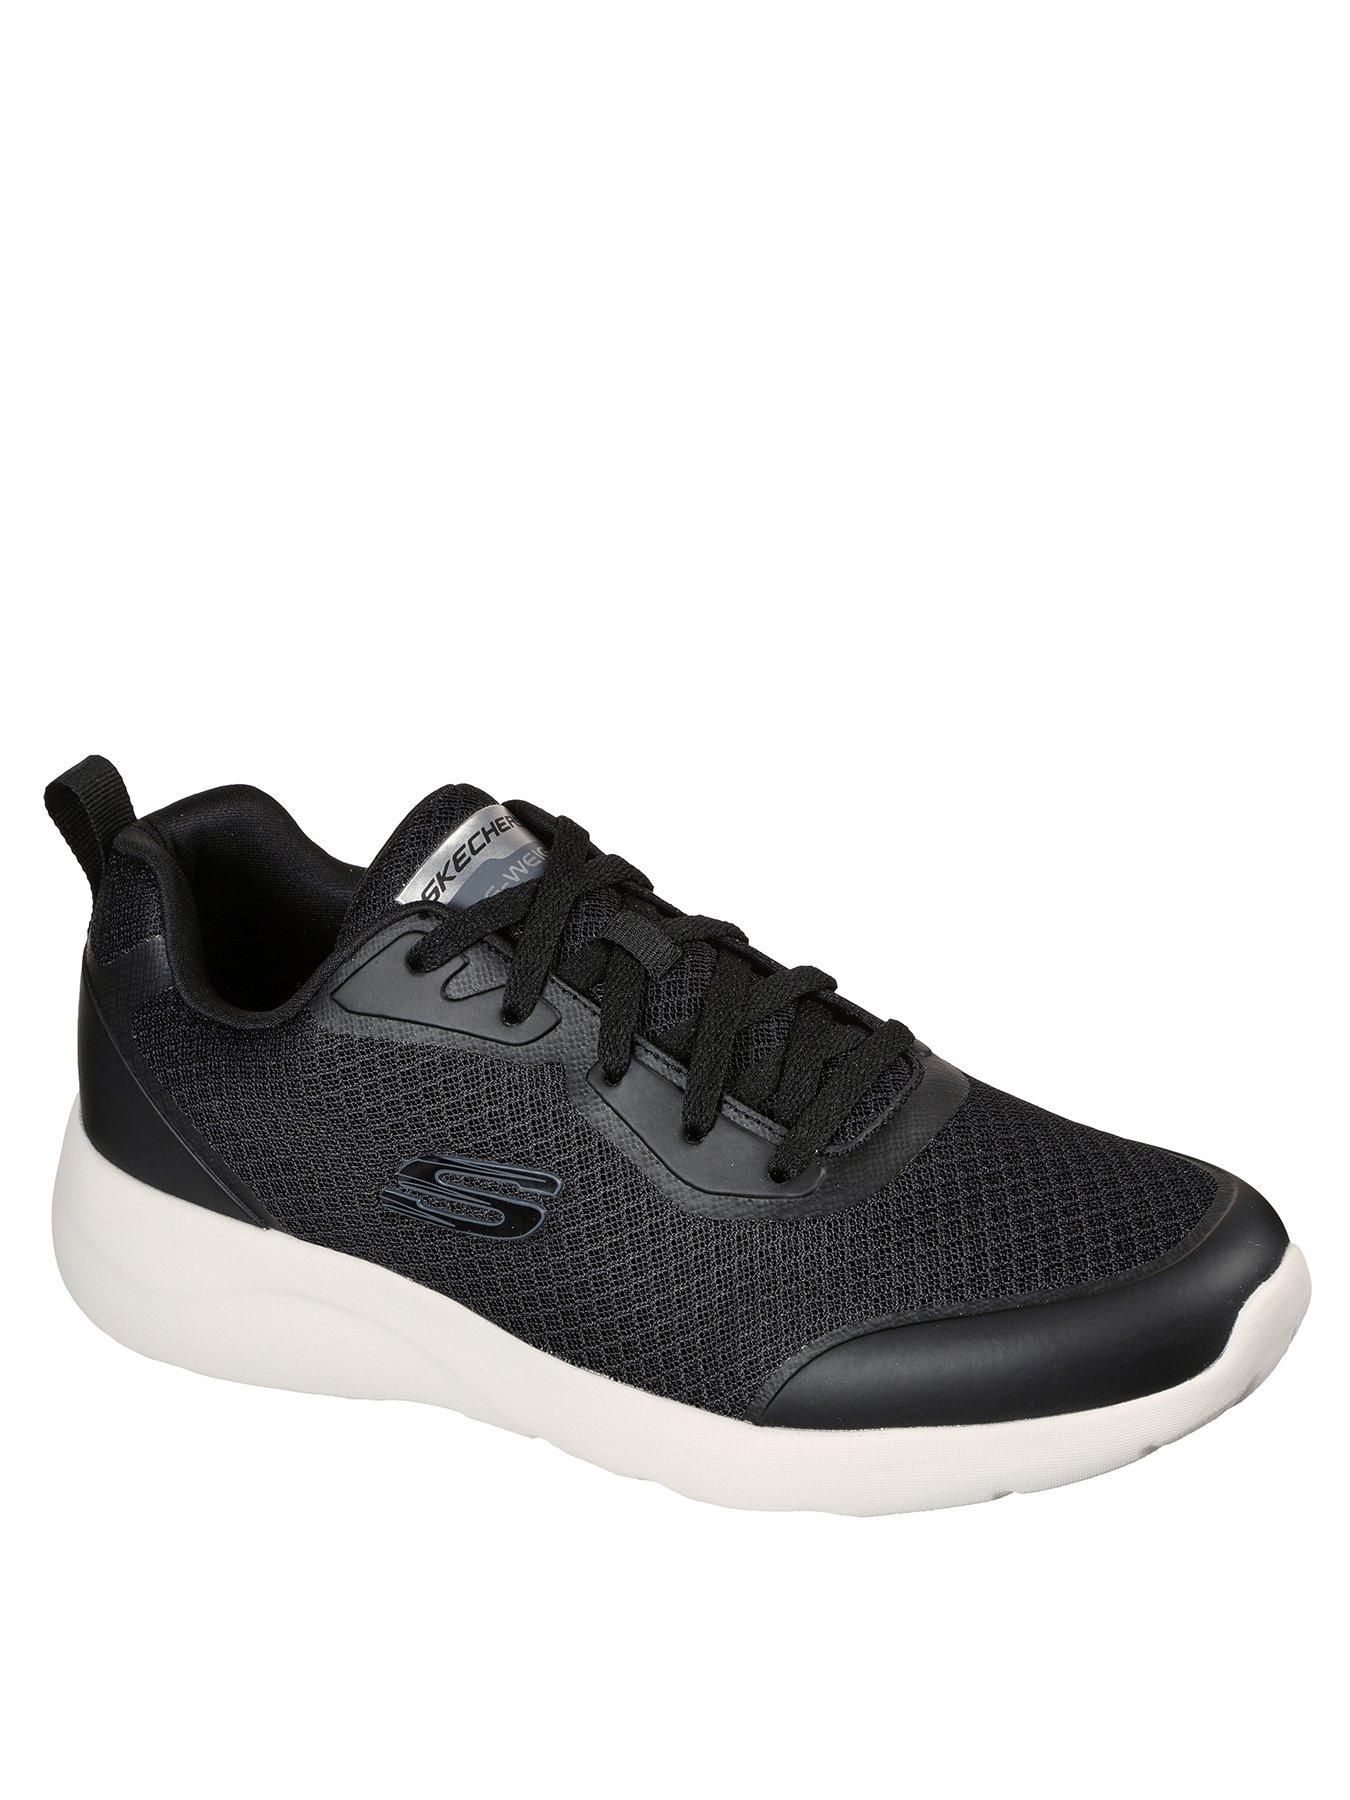  Dynamight 2.0 Mesh Memory Foam Lace Up Trainer